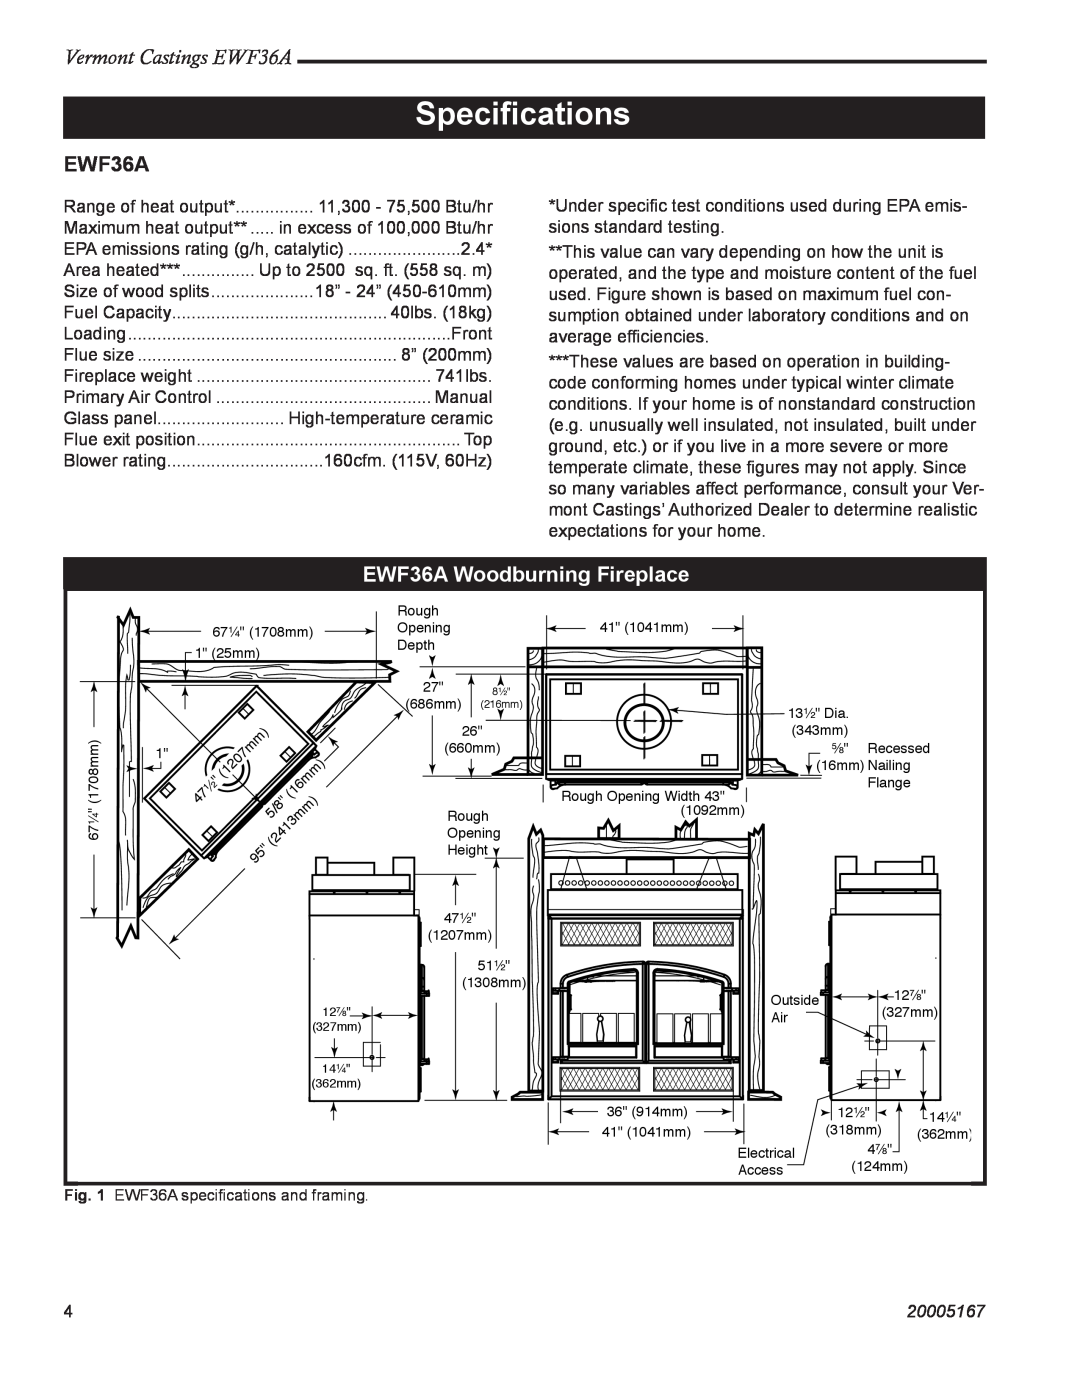 MHP manual Specifications, EWF36A Woodburning Fireplace, Vermont Castings EWF36A, 20005167 